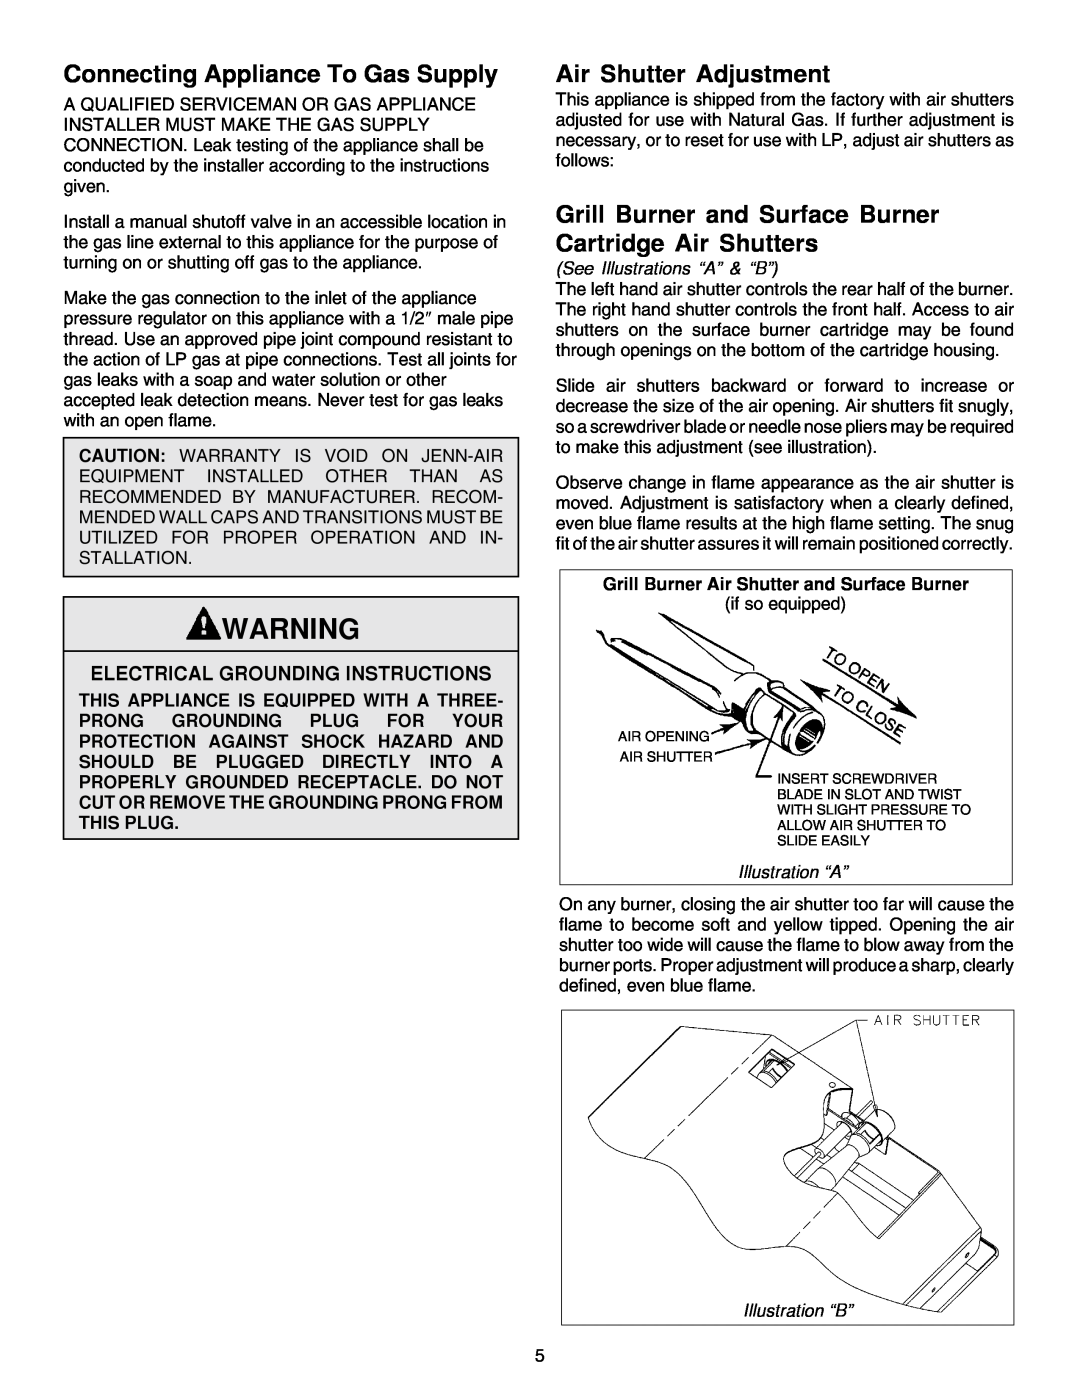 Jenn-Air JGD8348CDP Connecting Appliance To Gas Supply, Air Shutter Adjustment, Electrical Grounding Instructions 